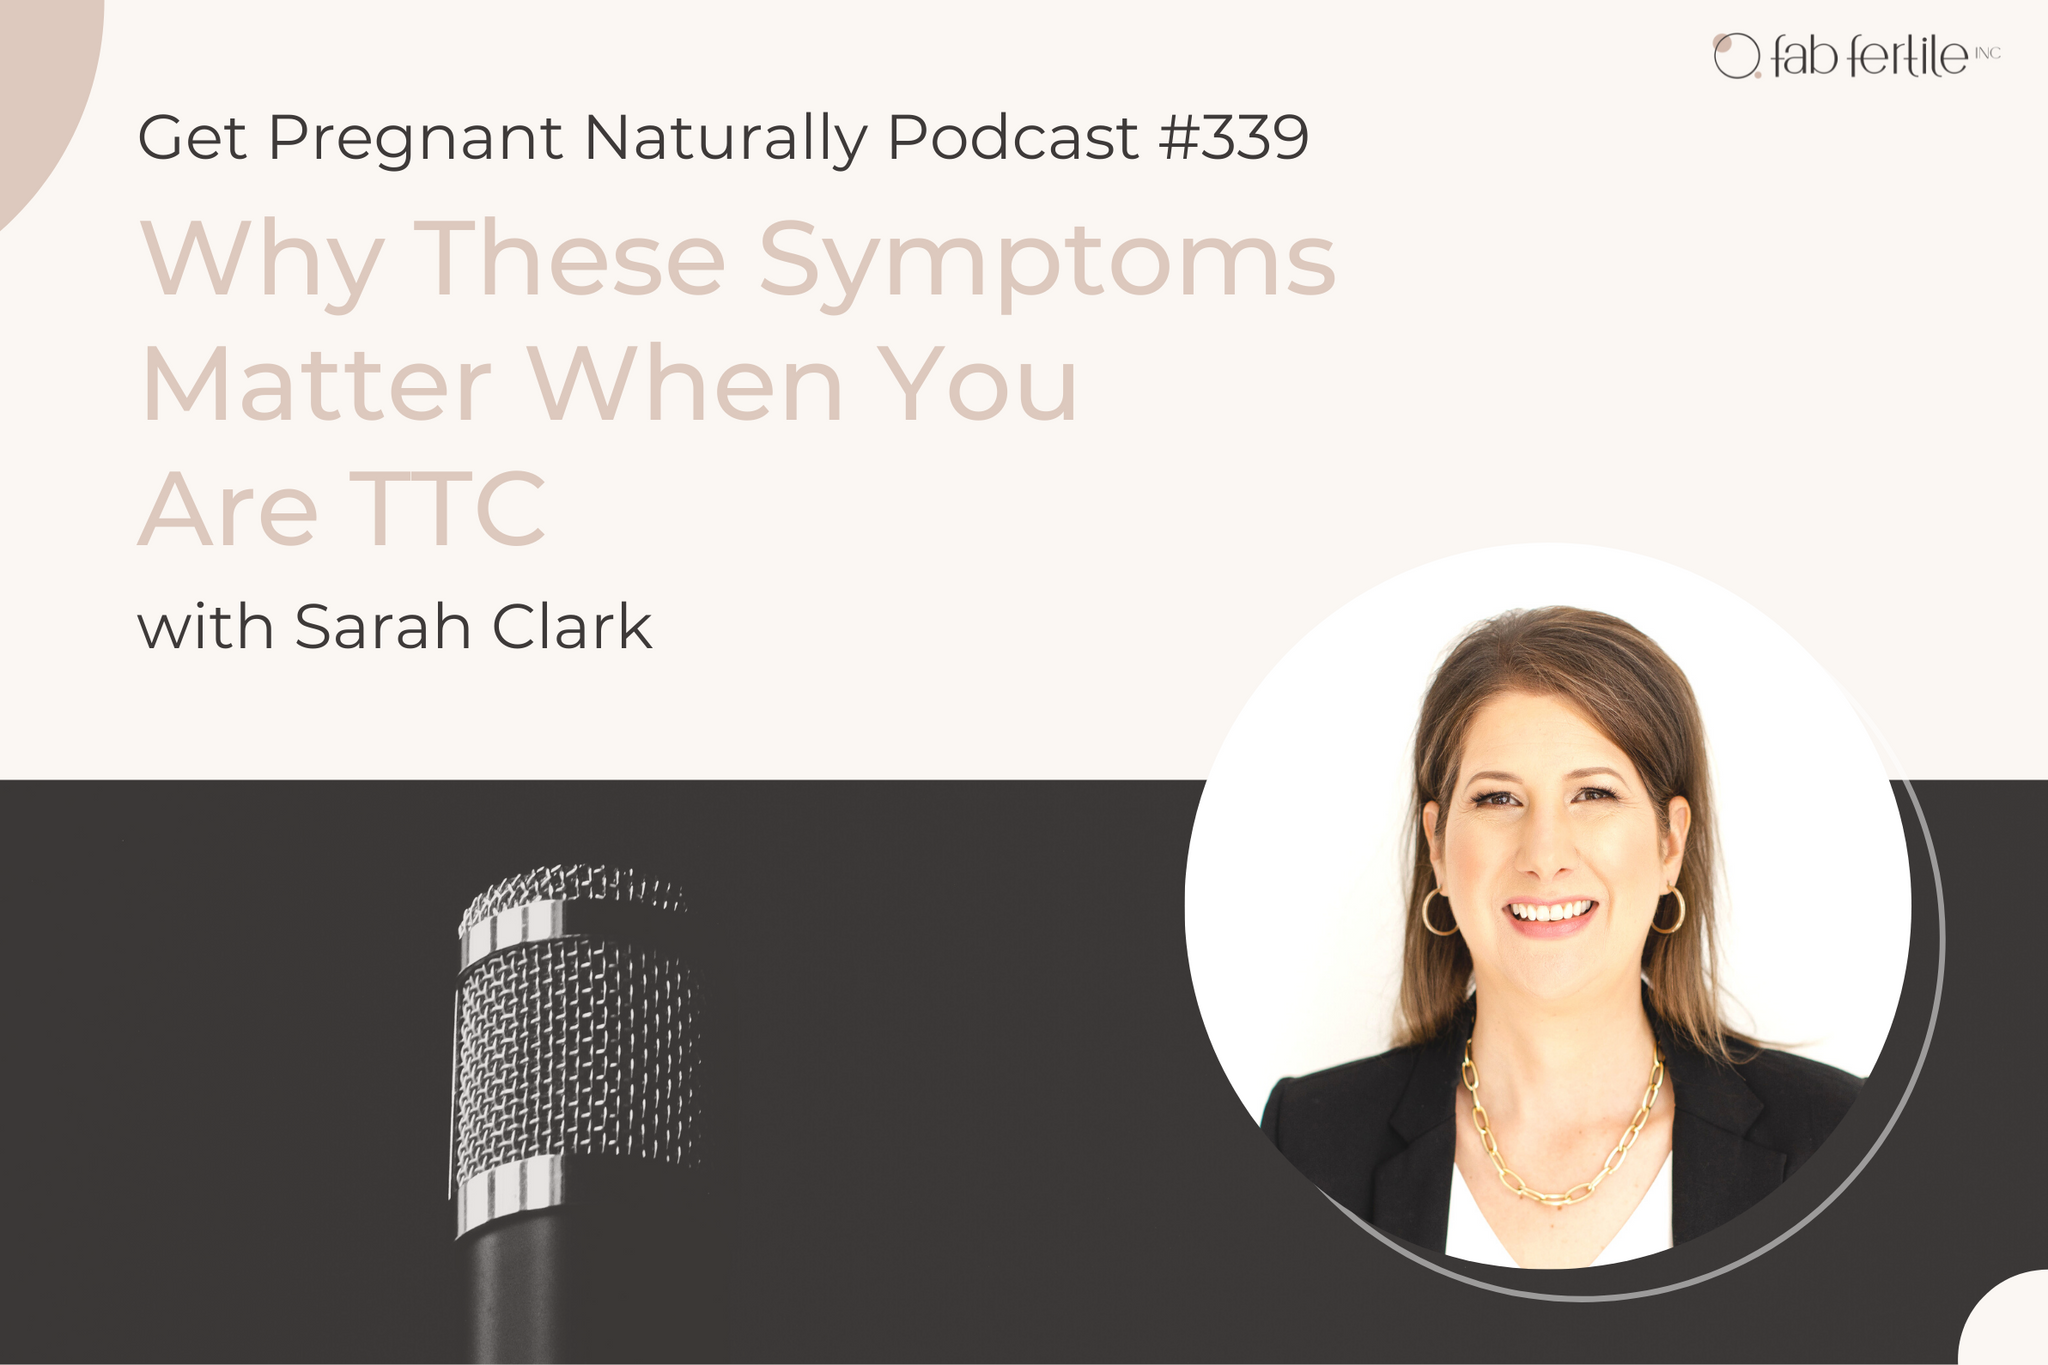 Why These Symptoms Matter When You Are TTC